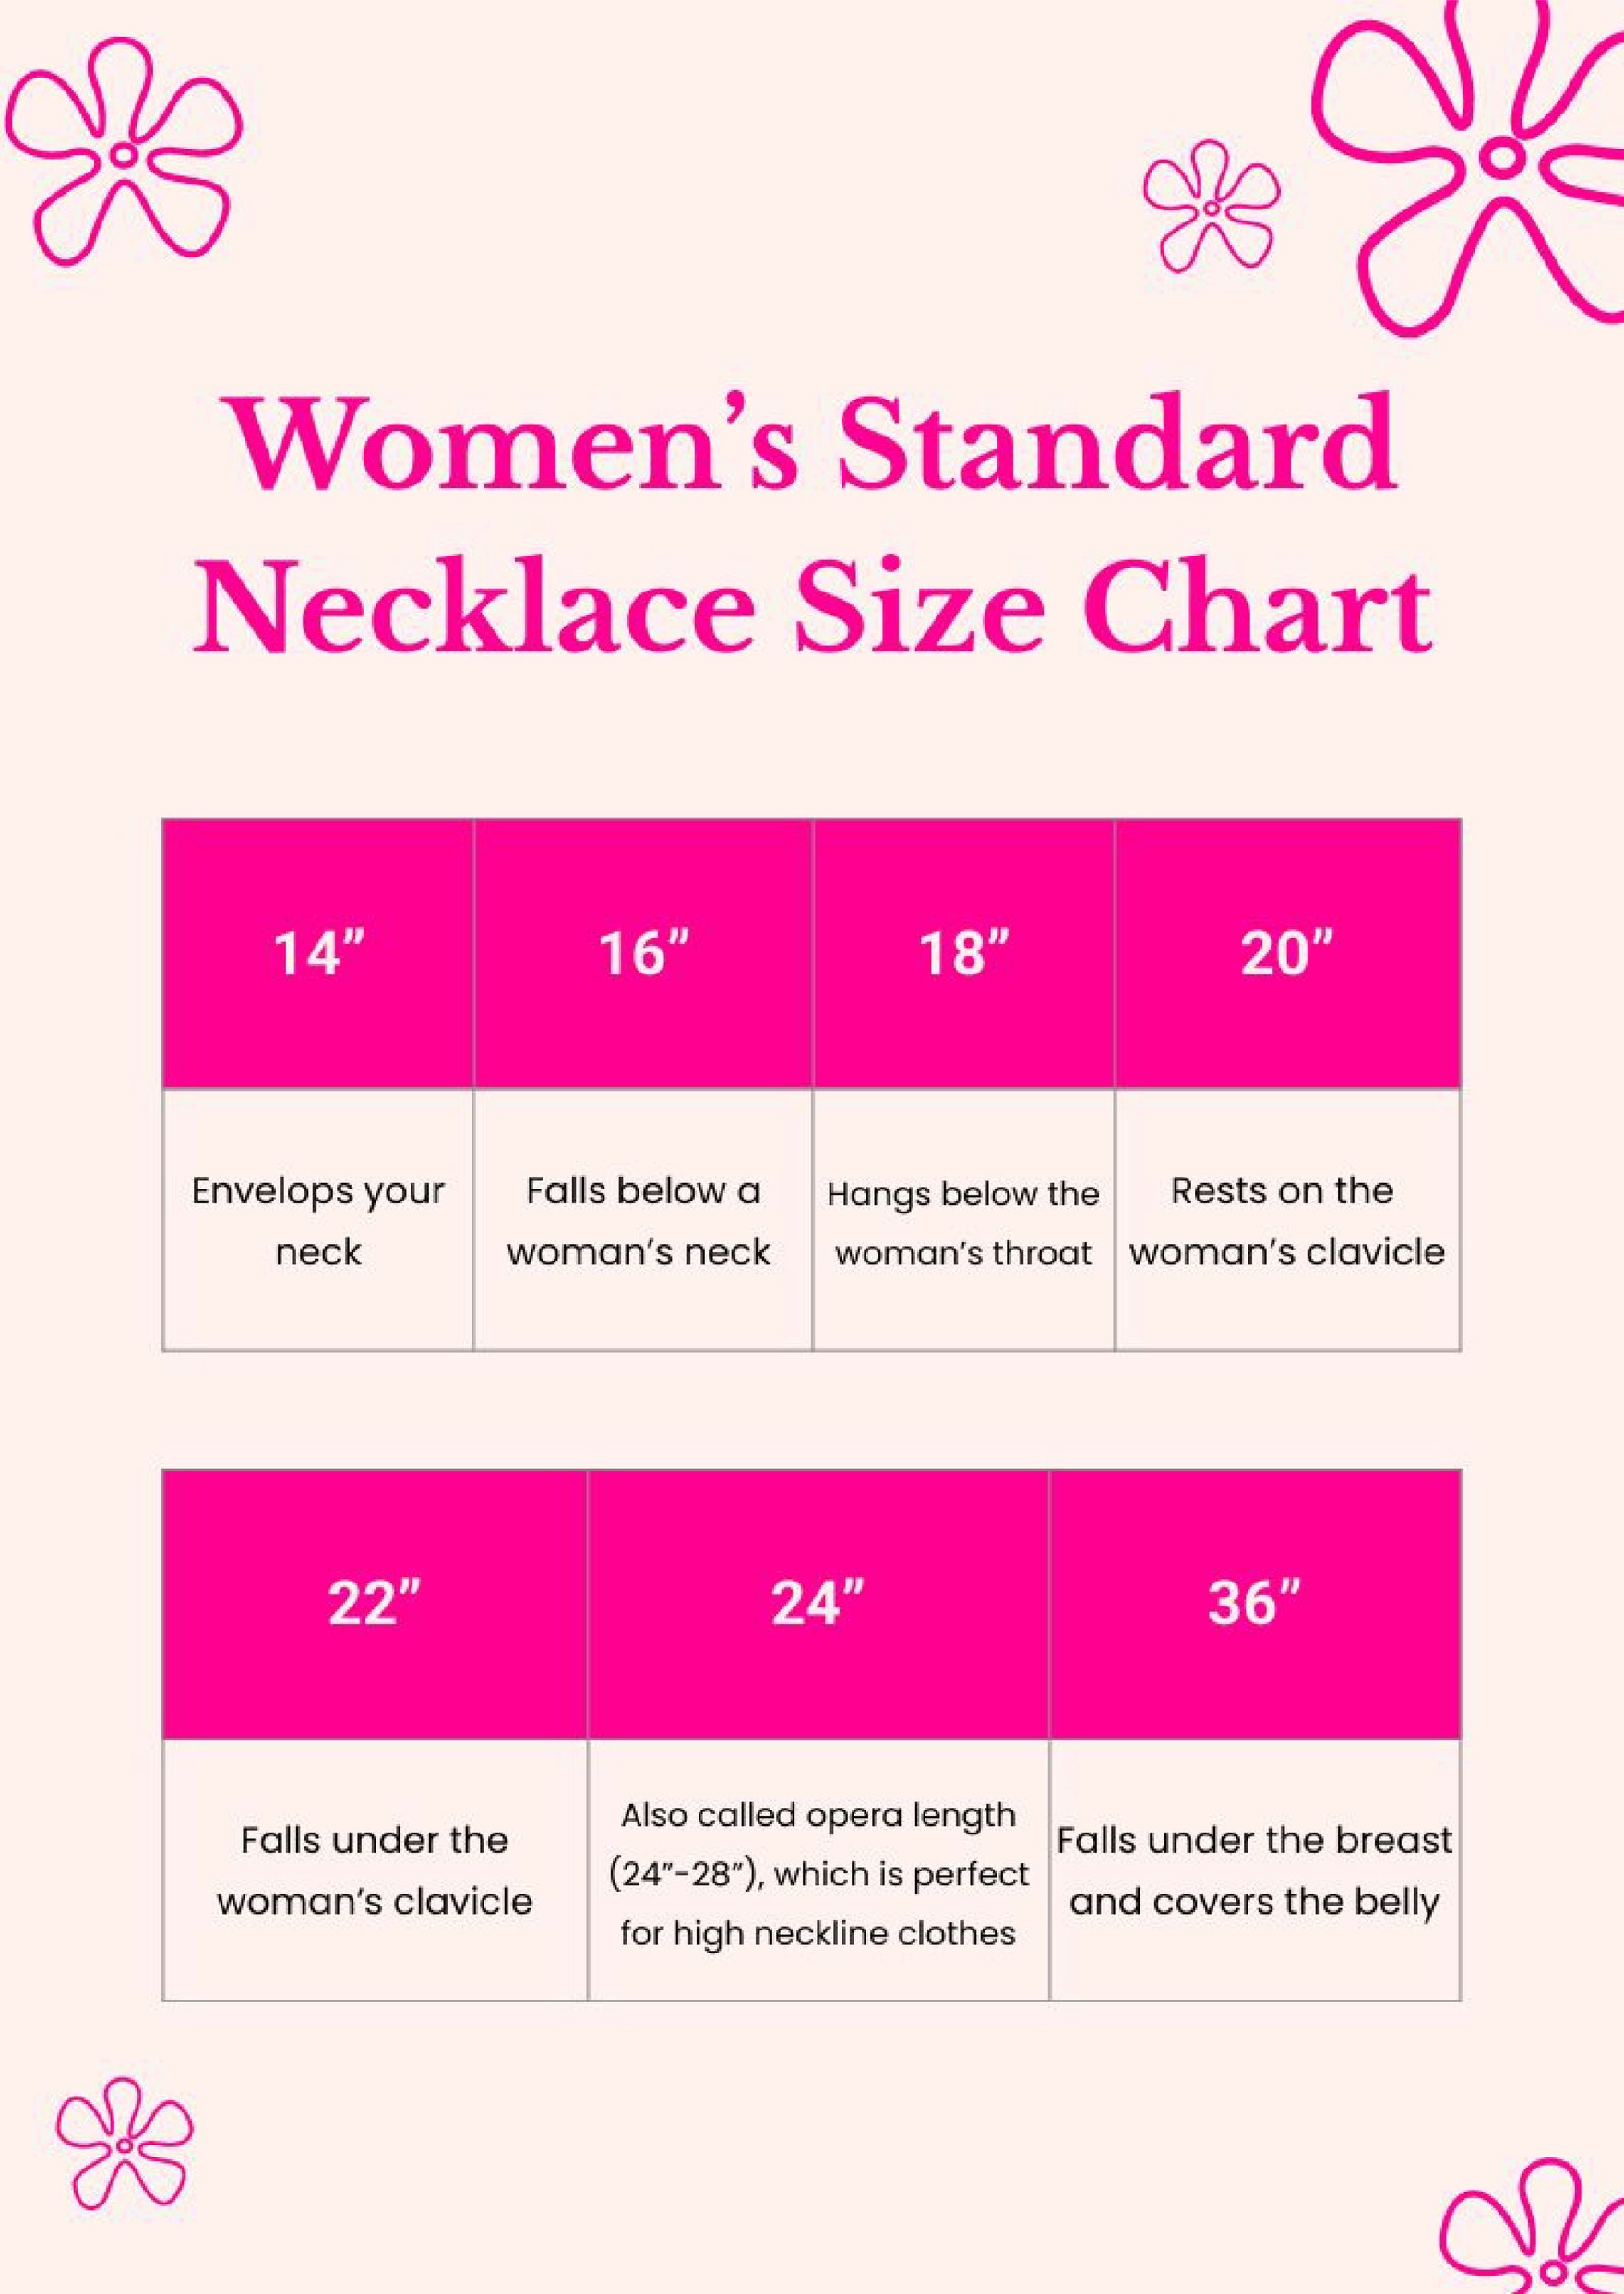 Necklace Size Chart For Women in PDF, Illustrator